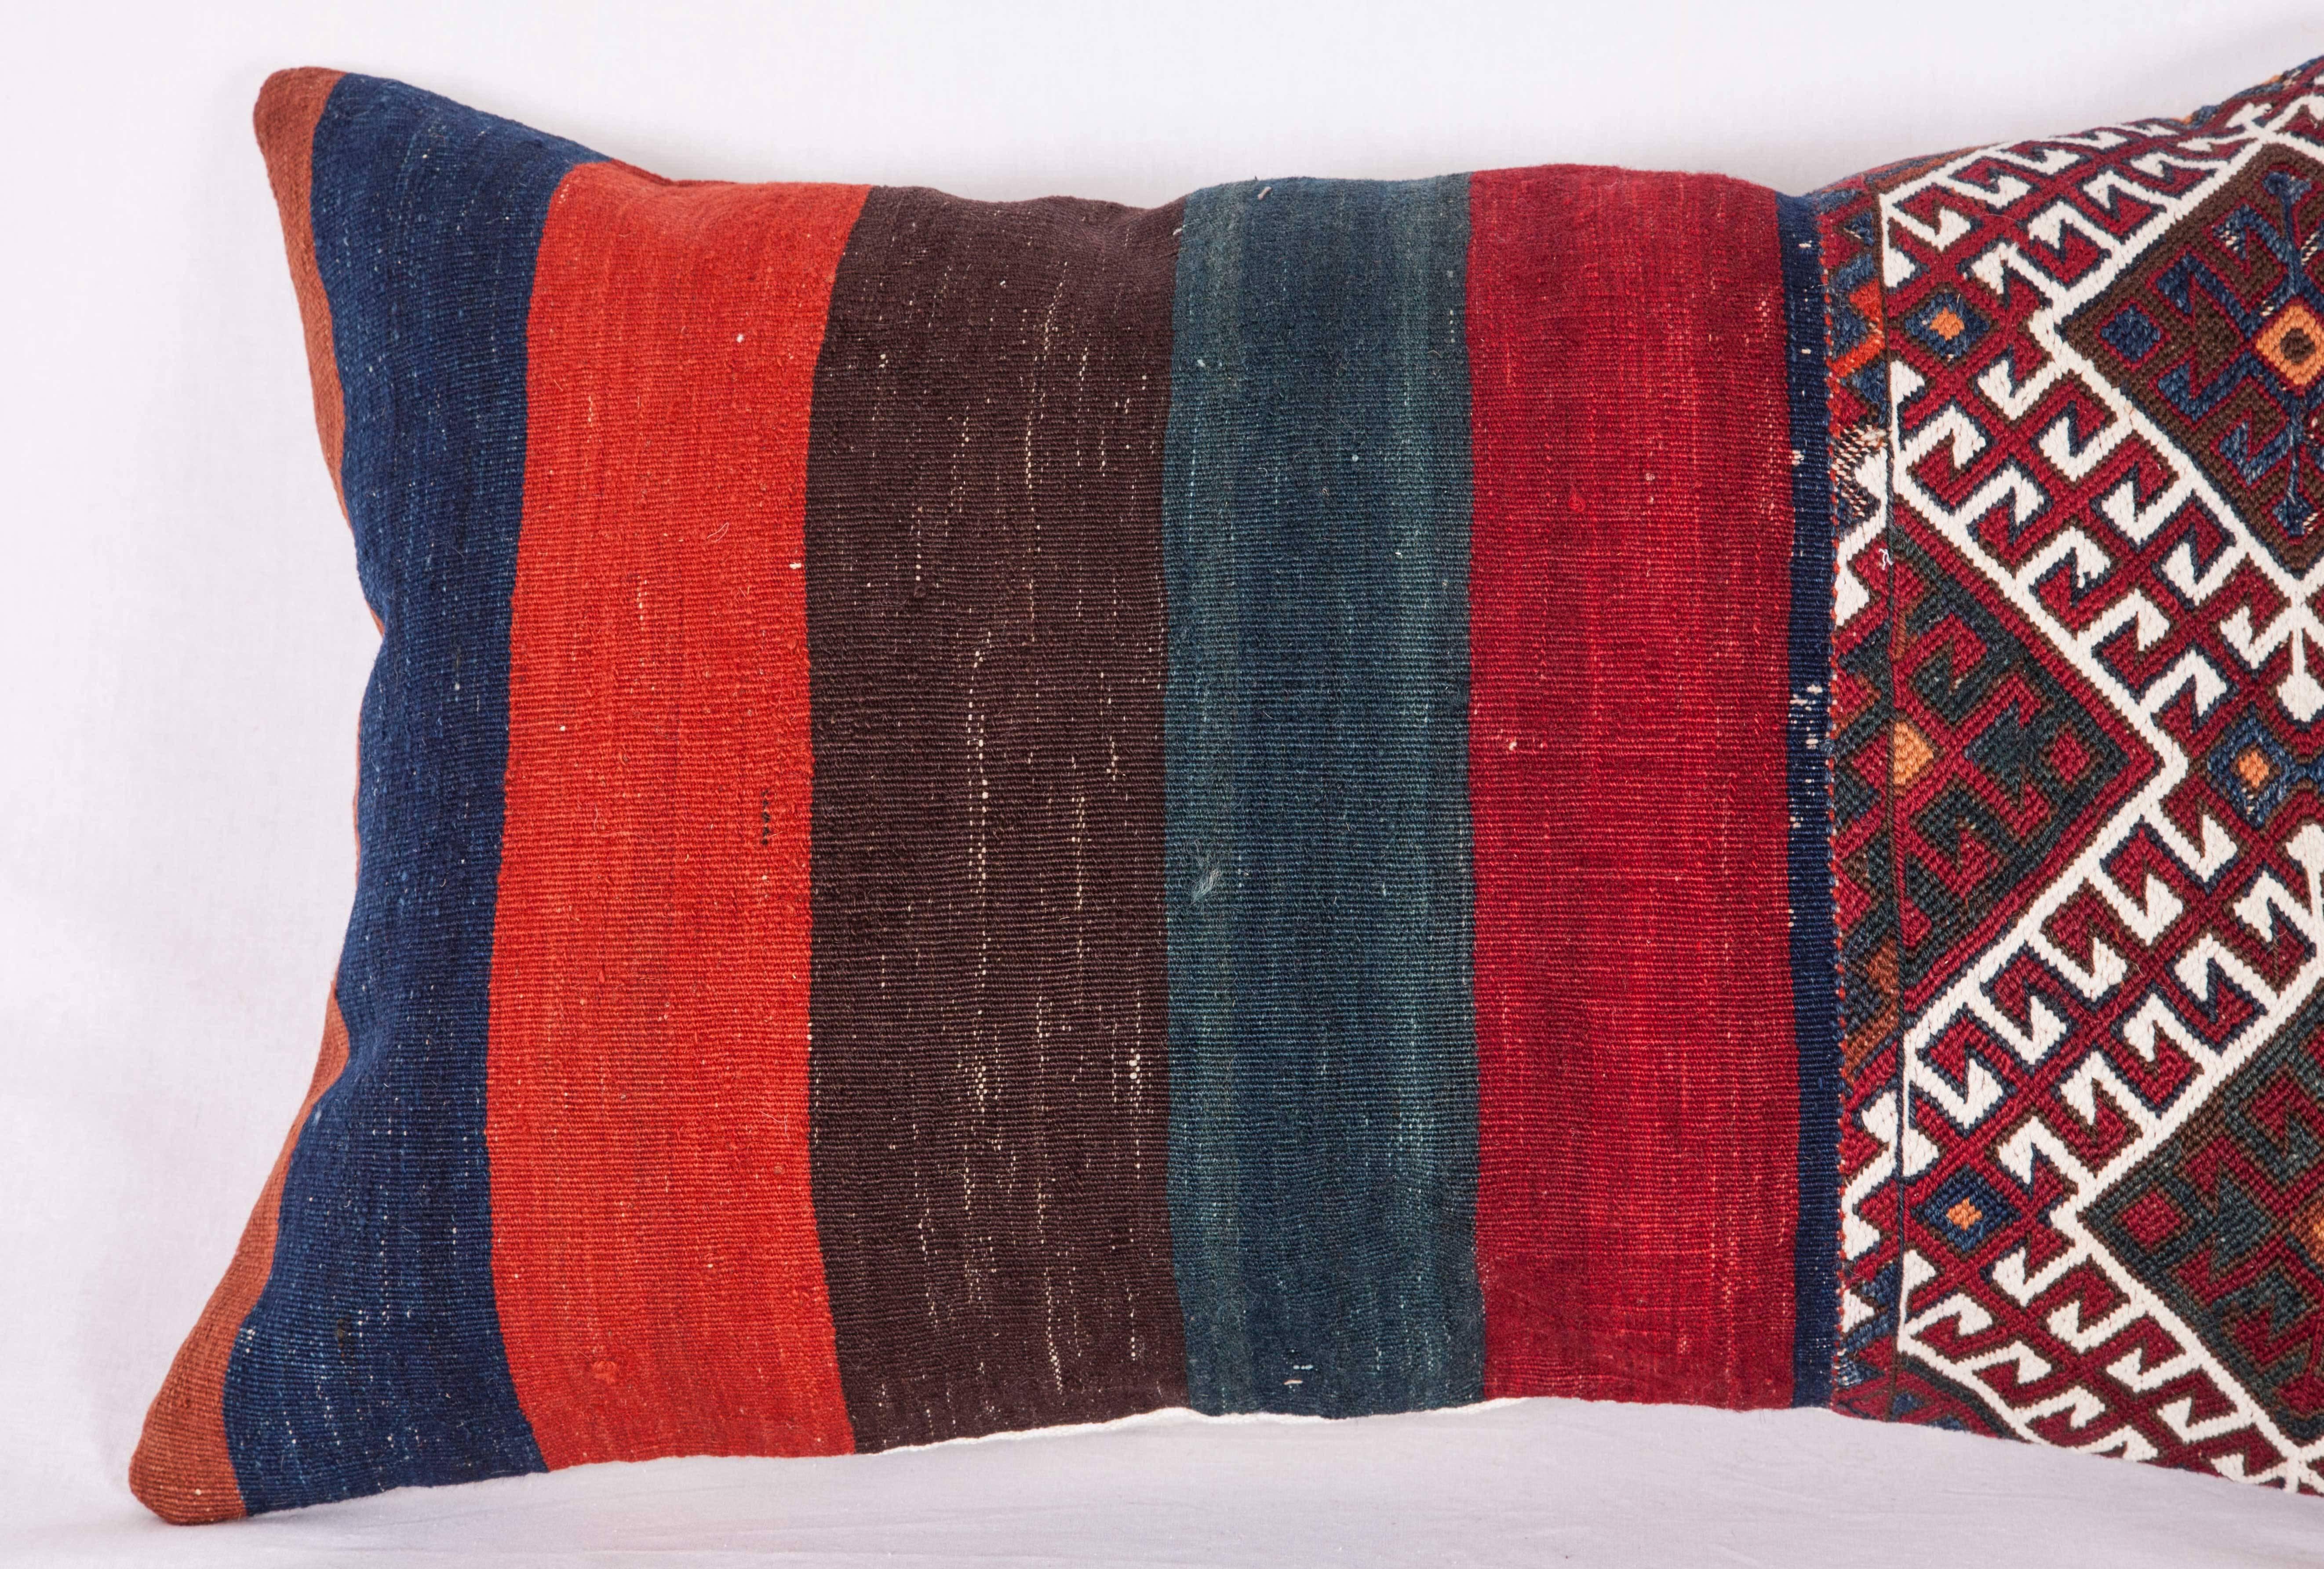 The pillow is made out of 19th century Anatolian bag. It does not come with an insert but it comes with a bag made to the size and out of cotton to accommodate the filling. The backing is made of vintage Anatolian cotton and wool textile. Please